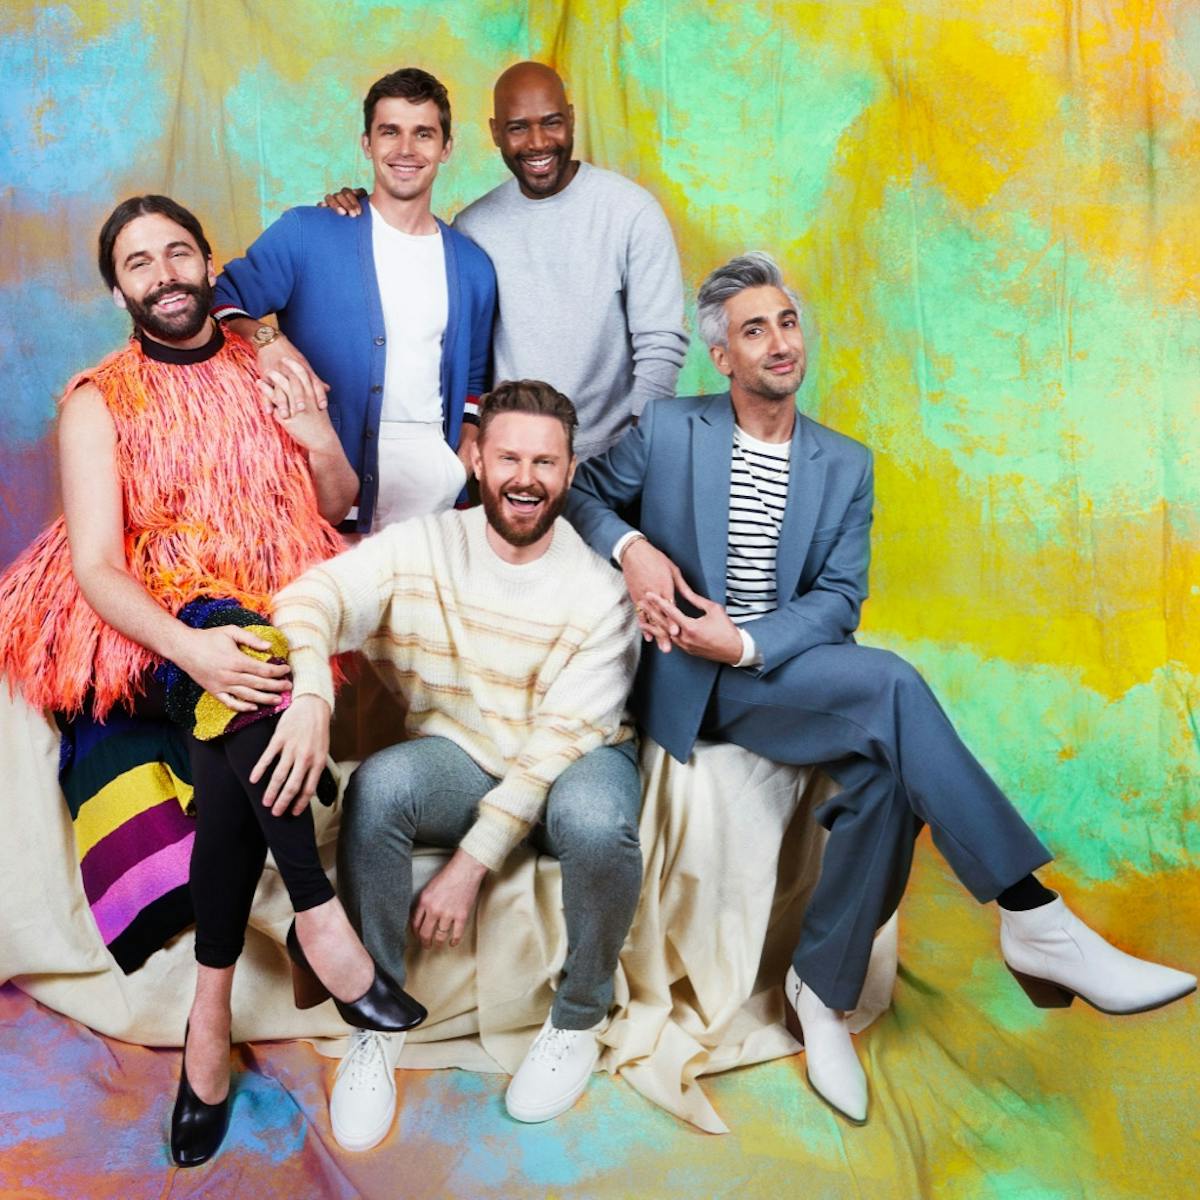 The Fab Five sit together against an orange and green spotted background. From left to right; Jonathan Van Ness wears a furry orange vest, Antoni Porowski wears a blue cardigan, Karamo Brown wears a light blue sweater, Bobby Berk wears jeans and a striped sweater, Tan France wears a grey suit with white boots.